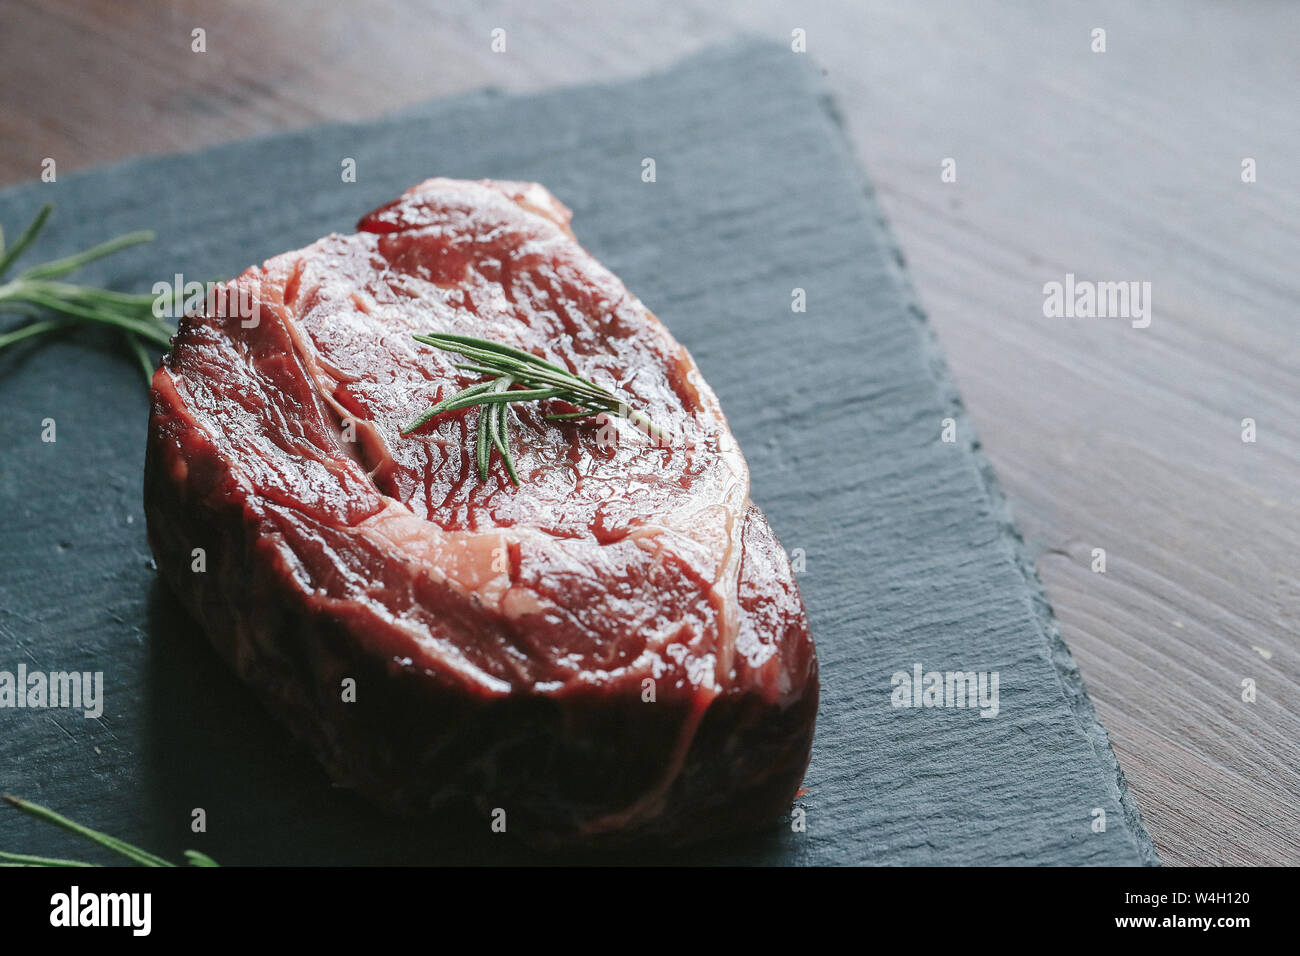 Cooking, meat preparation. Raw steak on the table Stock Photo